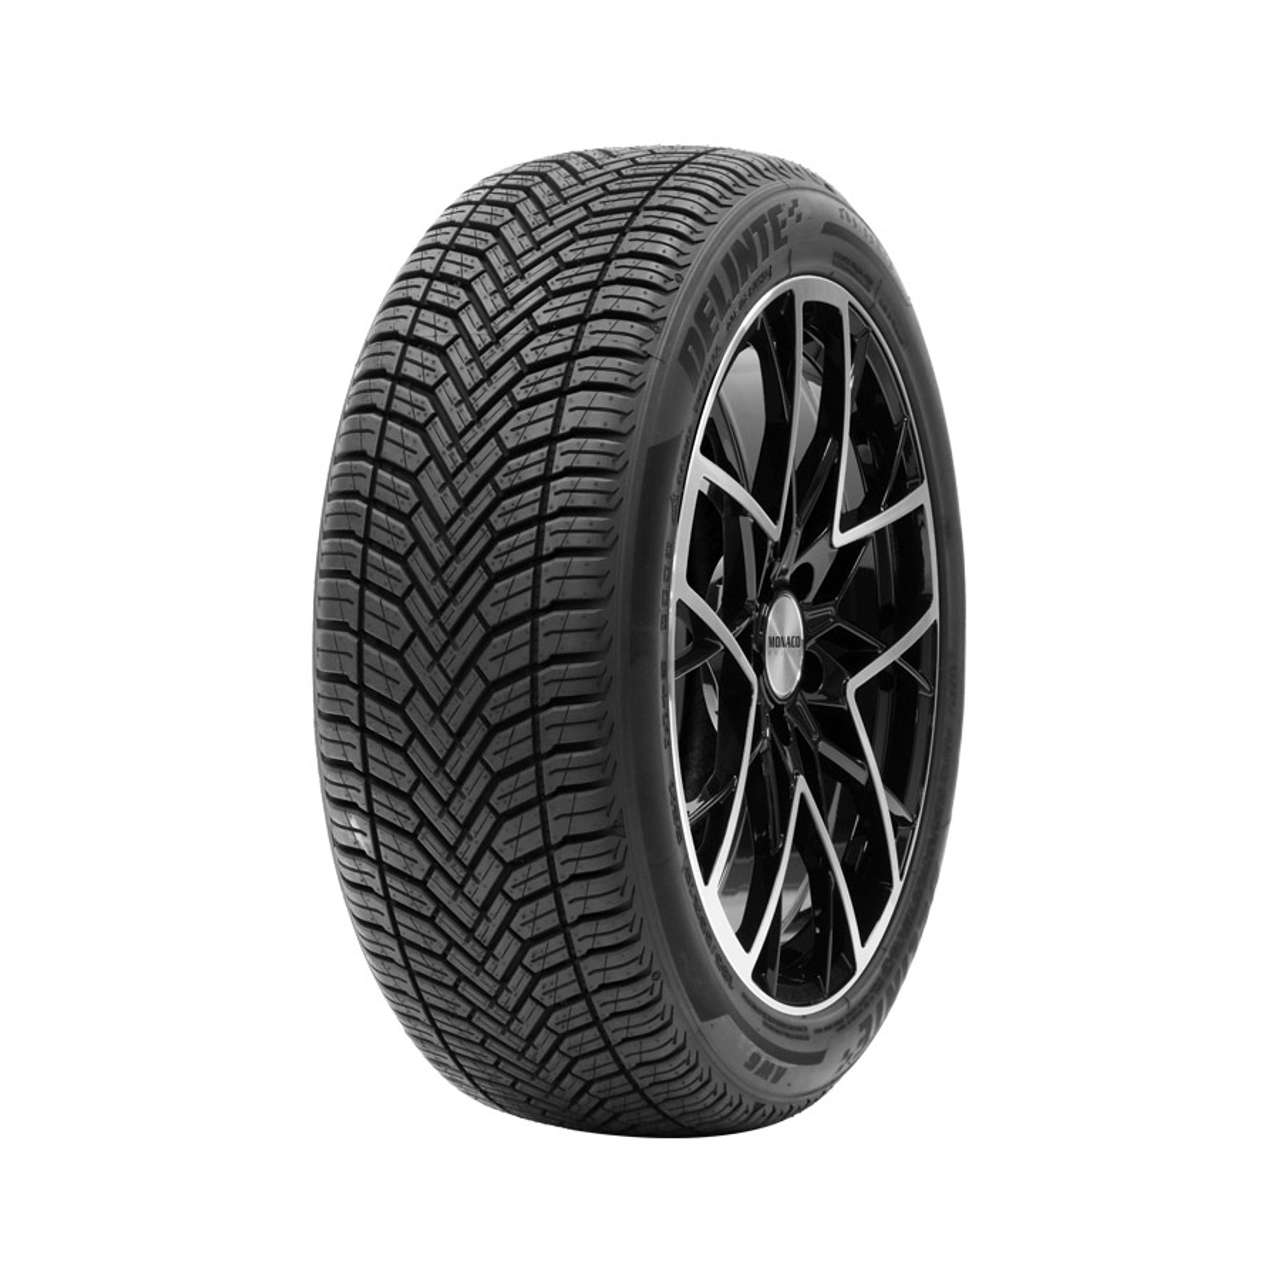 DELINTE AW6 185/60R15 88H BSW